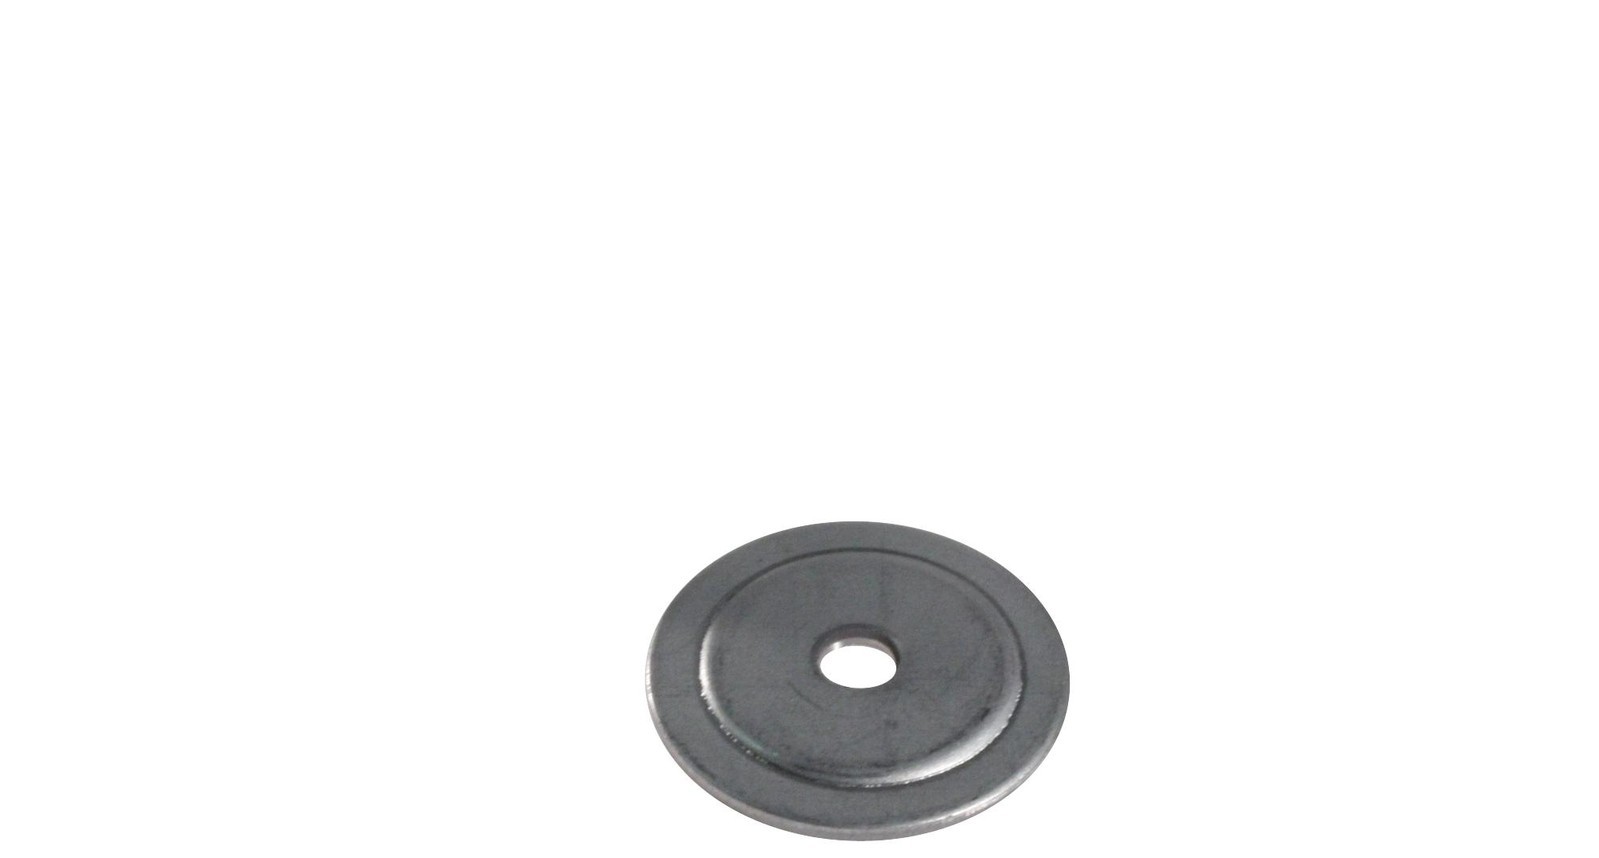 nVent Hoffman As050 Hole Seal, Steel, 22mm